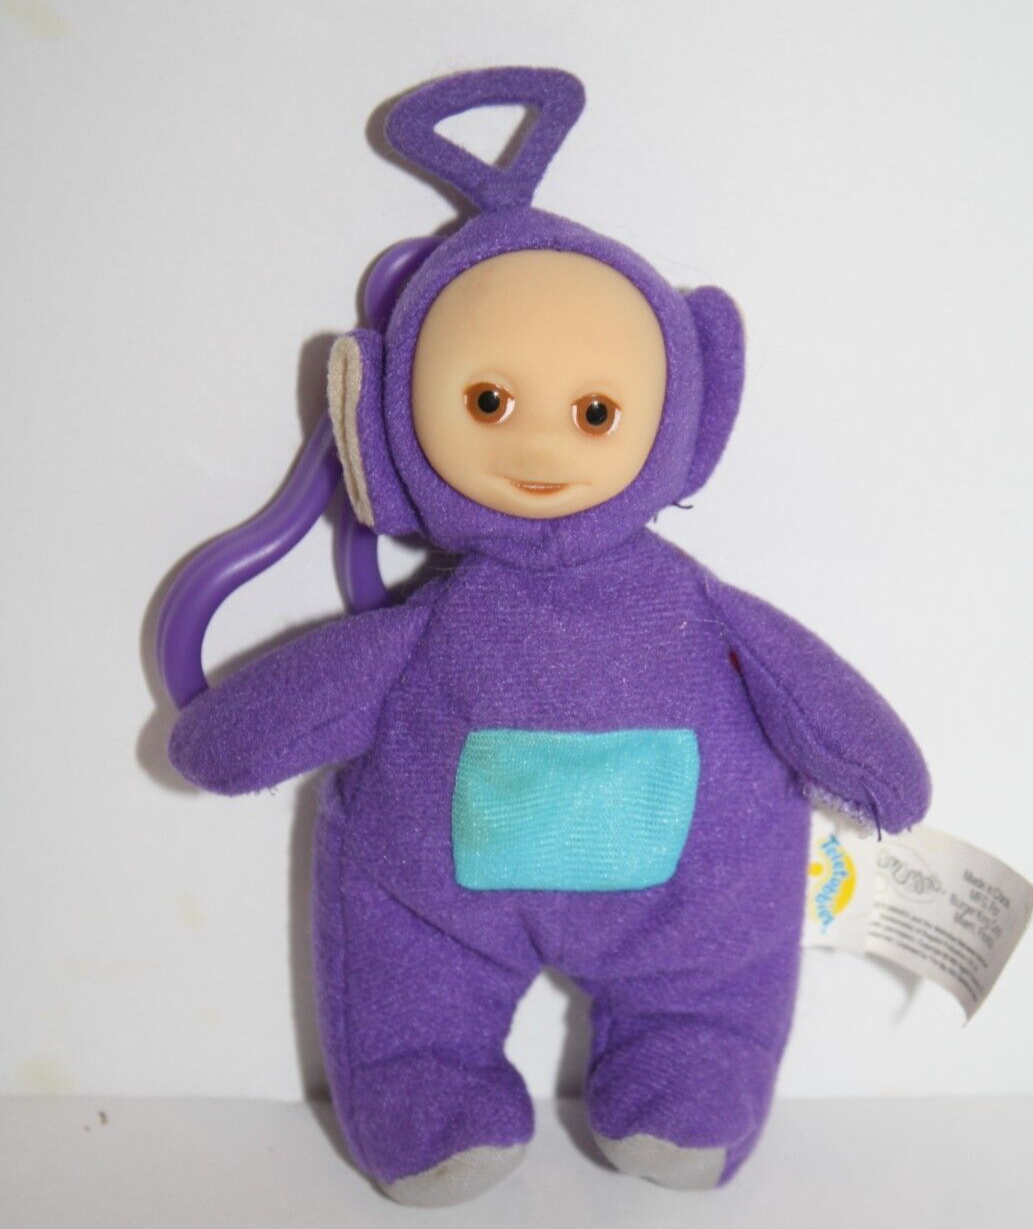 Teletubbies Tinky Winky Purple Plush Clip Soft Toy 5" Finger Puppet Beanbag 1999 - $8.80